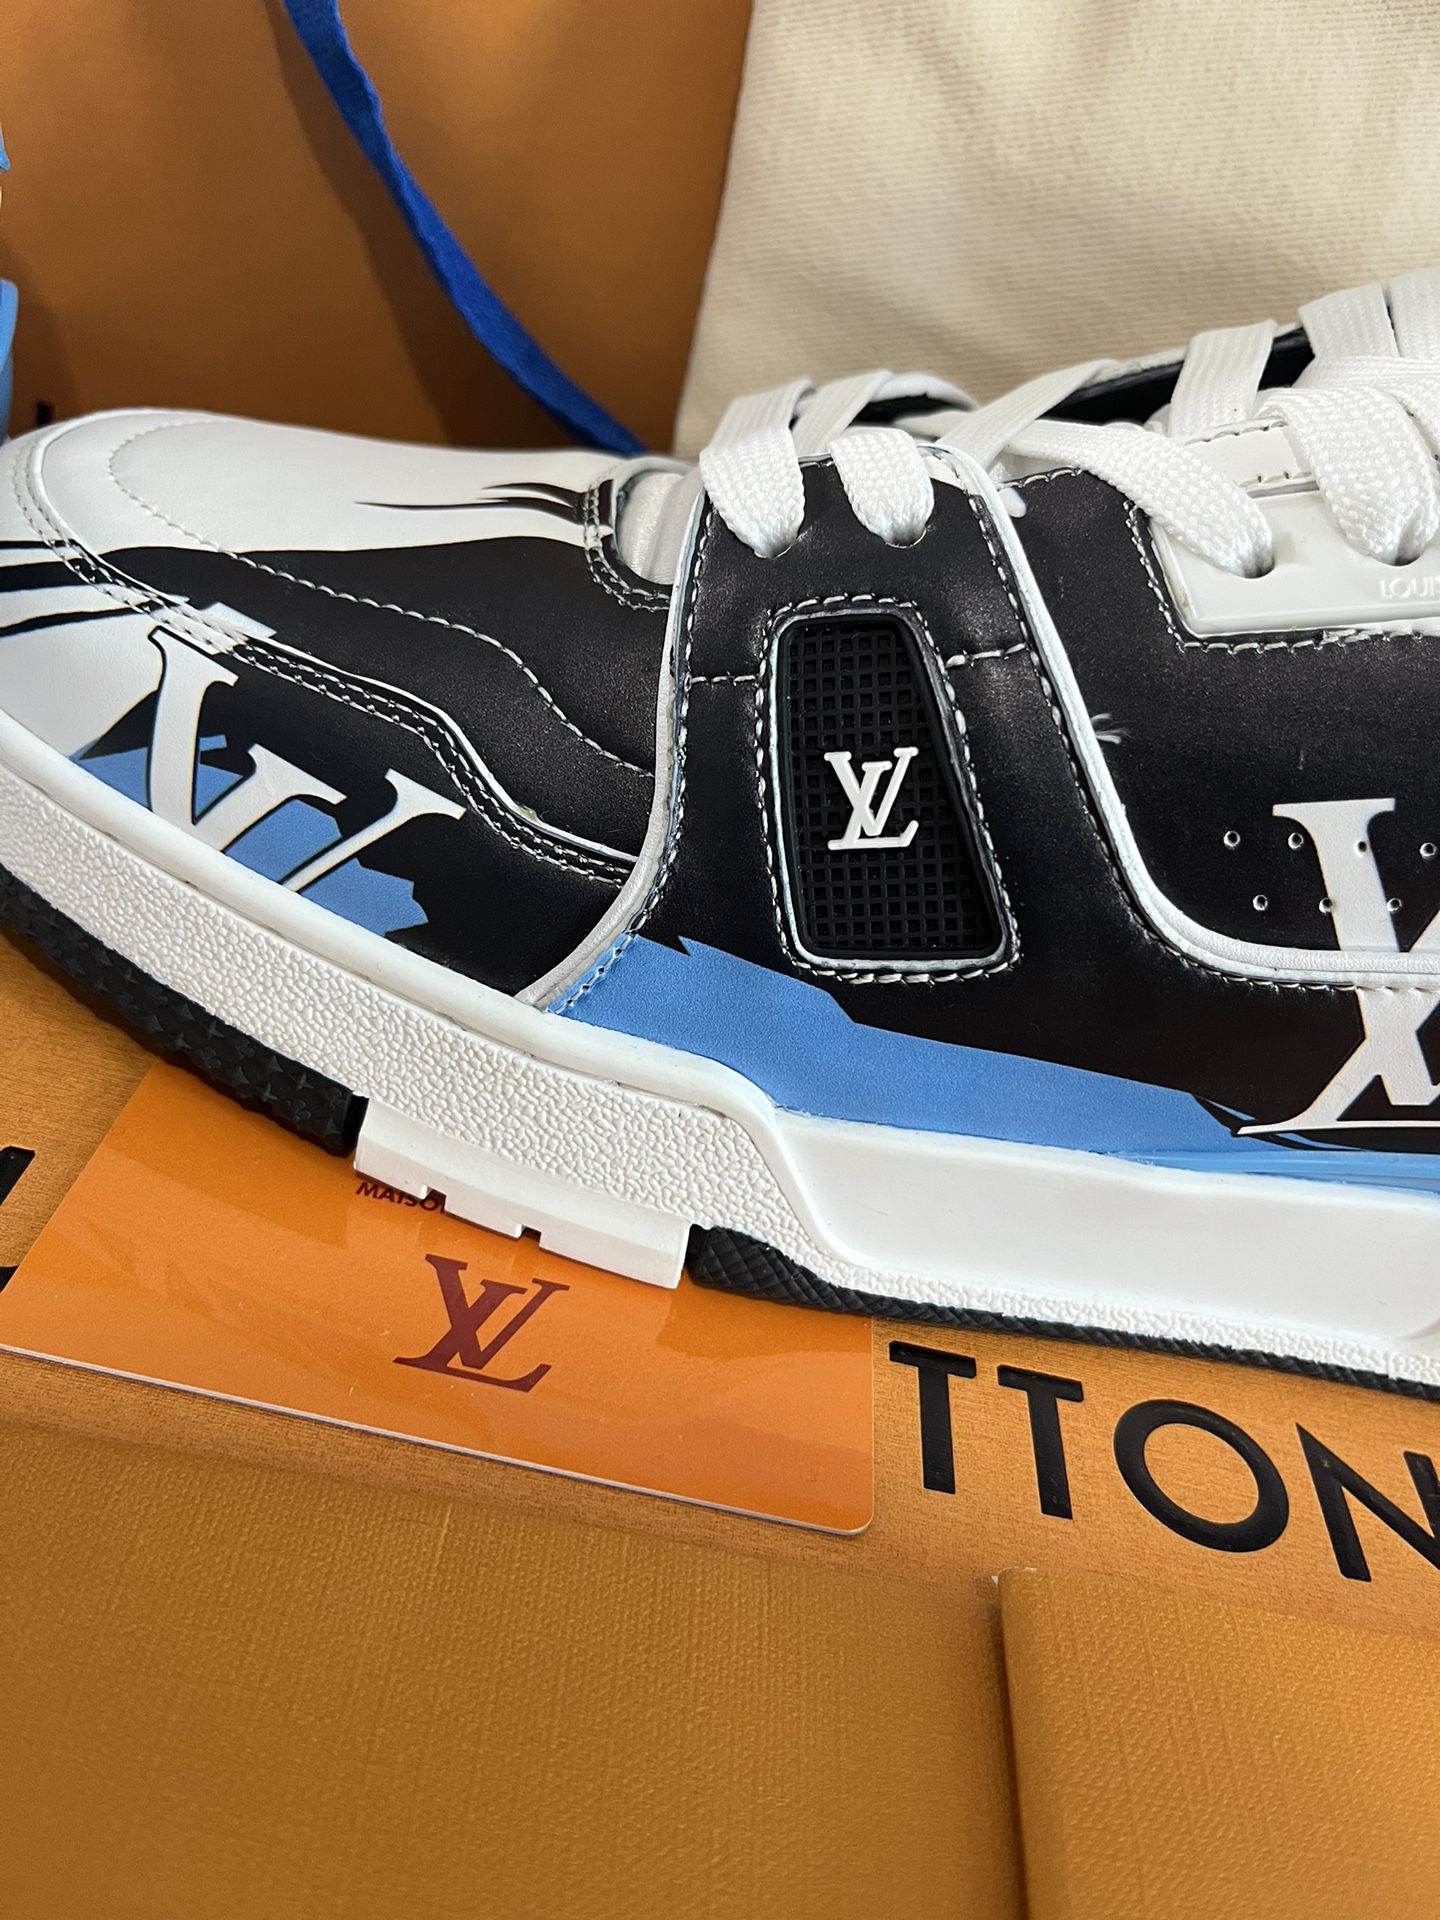 Brand New Louis Vuitton Trainer #54 Graphic Print Blue/White Sneakers (Euro  44/Men's 10-11) for Sale in Valley Stream, NY - OfferUp